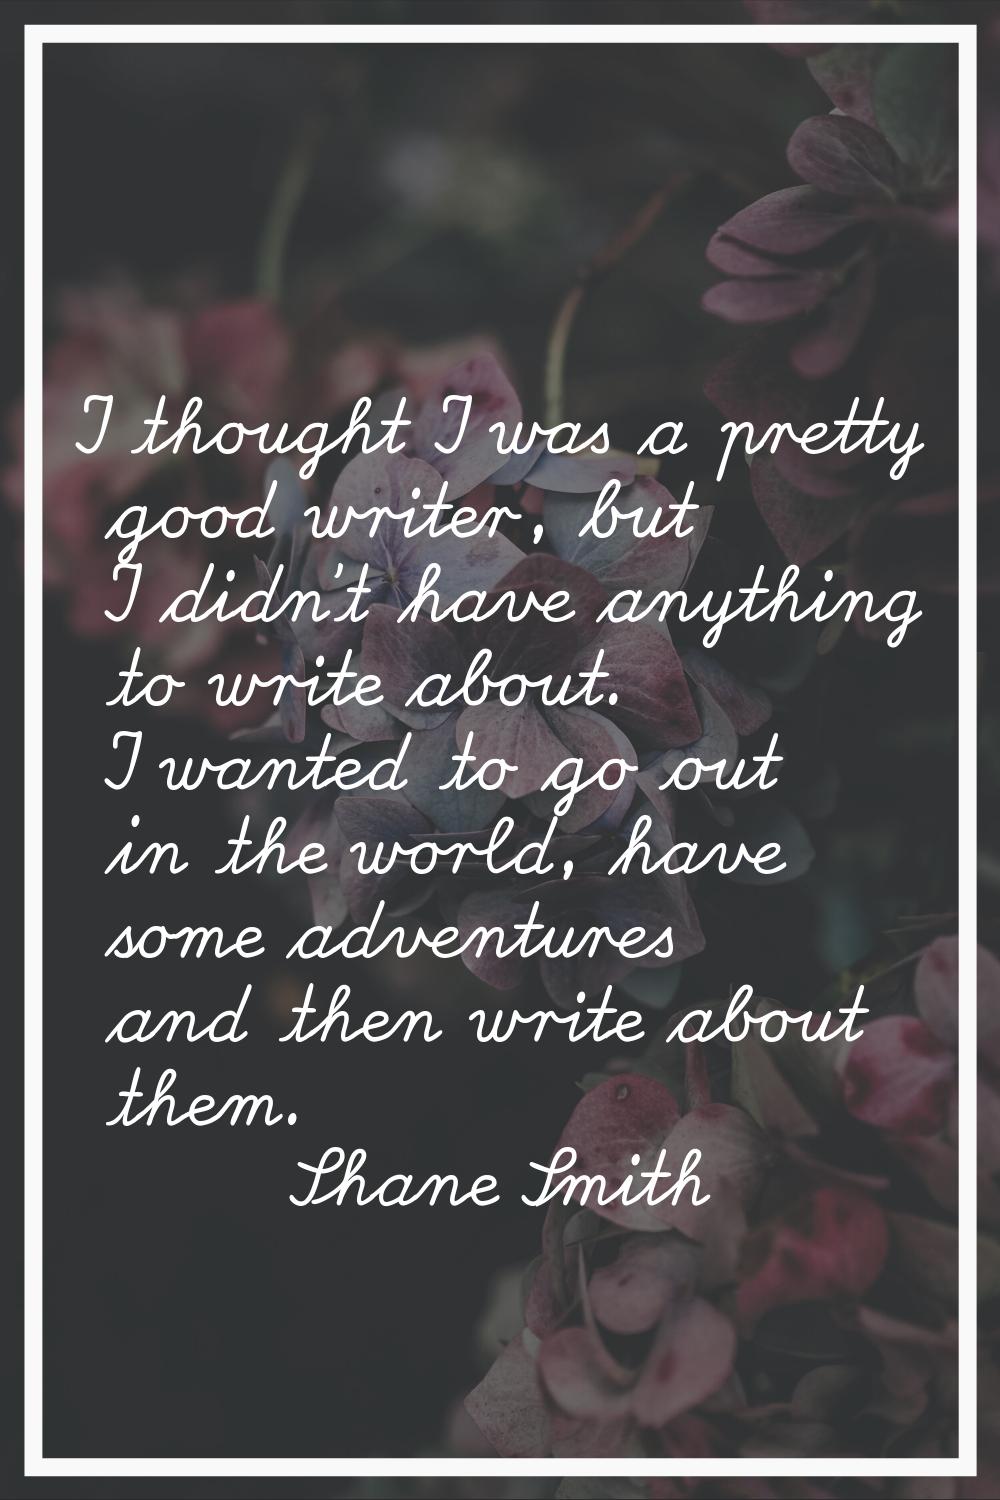 I thought I was a pretty good writer, but I didn't have anything to write about. I wanted to go out